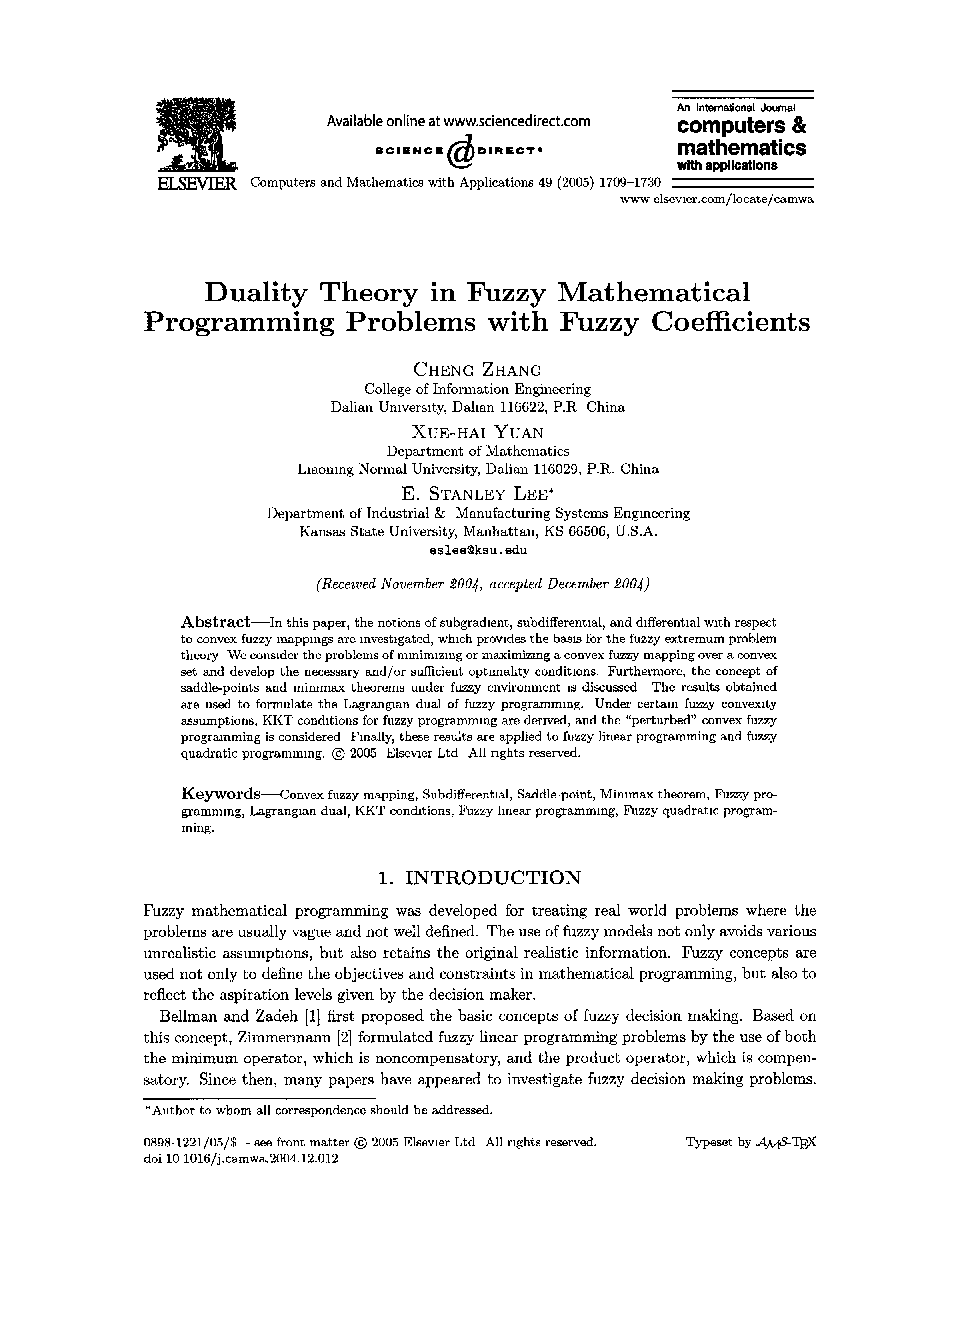 Duality theory in fuzzy mathematical programming problems with fuzzy coefficients